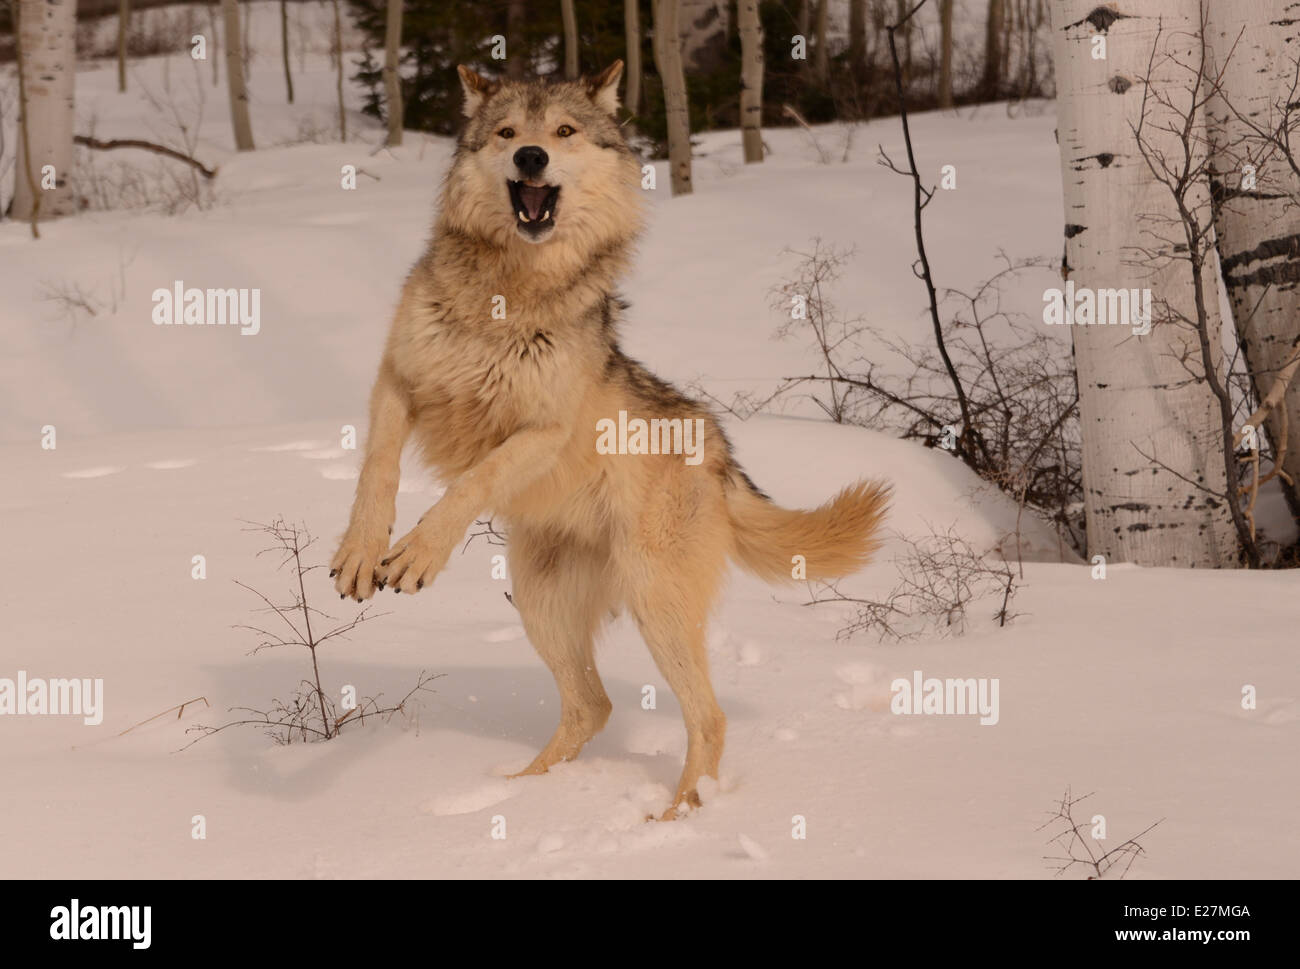 wolf in snow jumping Stock Photo